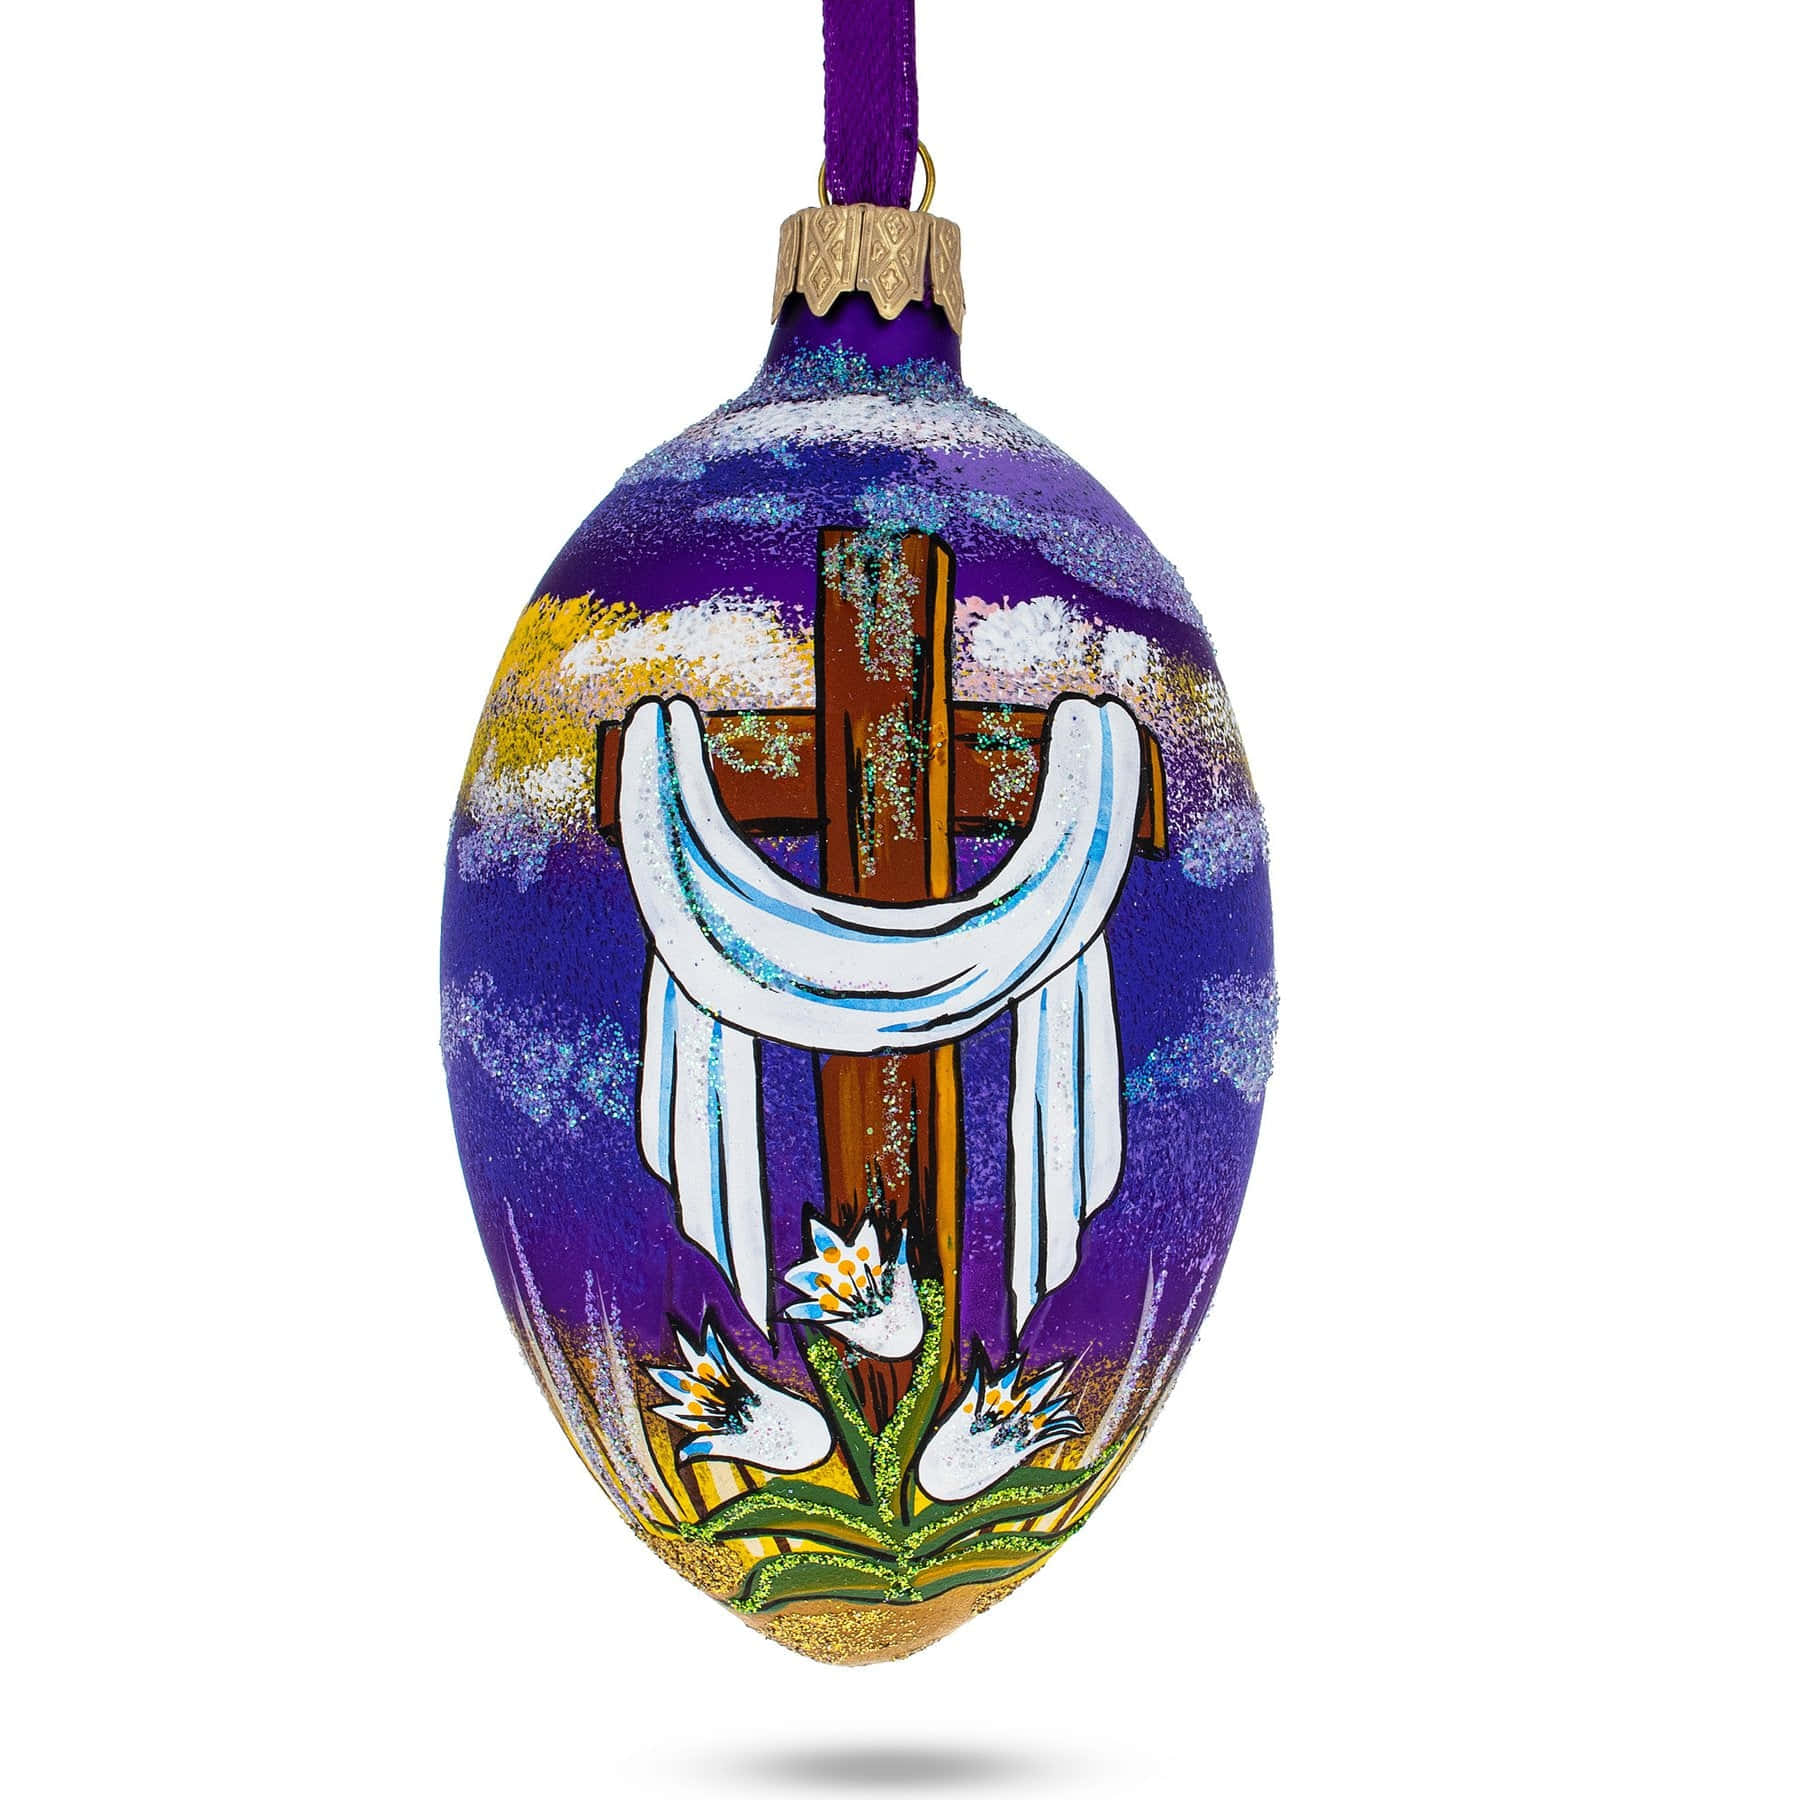 A Purple Glass Ornament With A Cross And Flowers